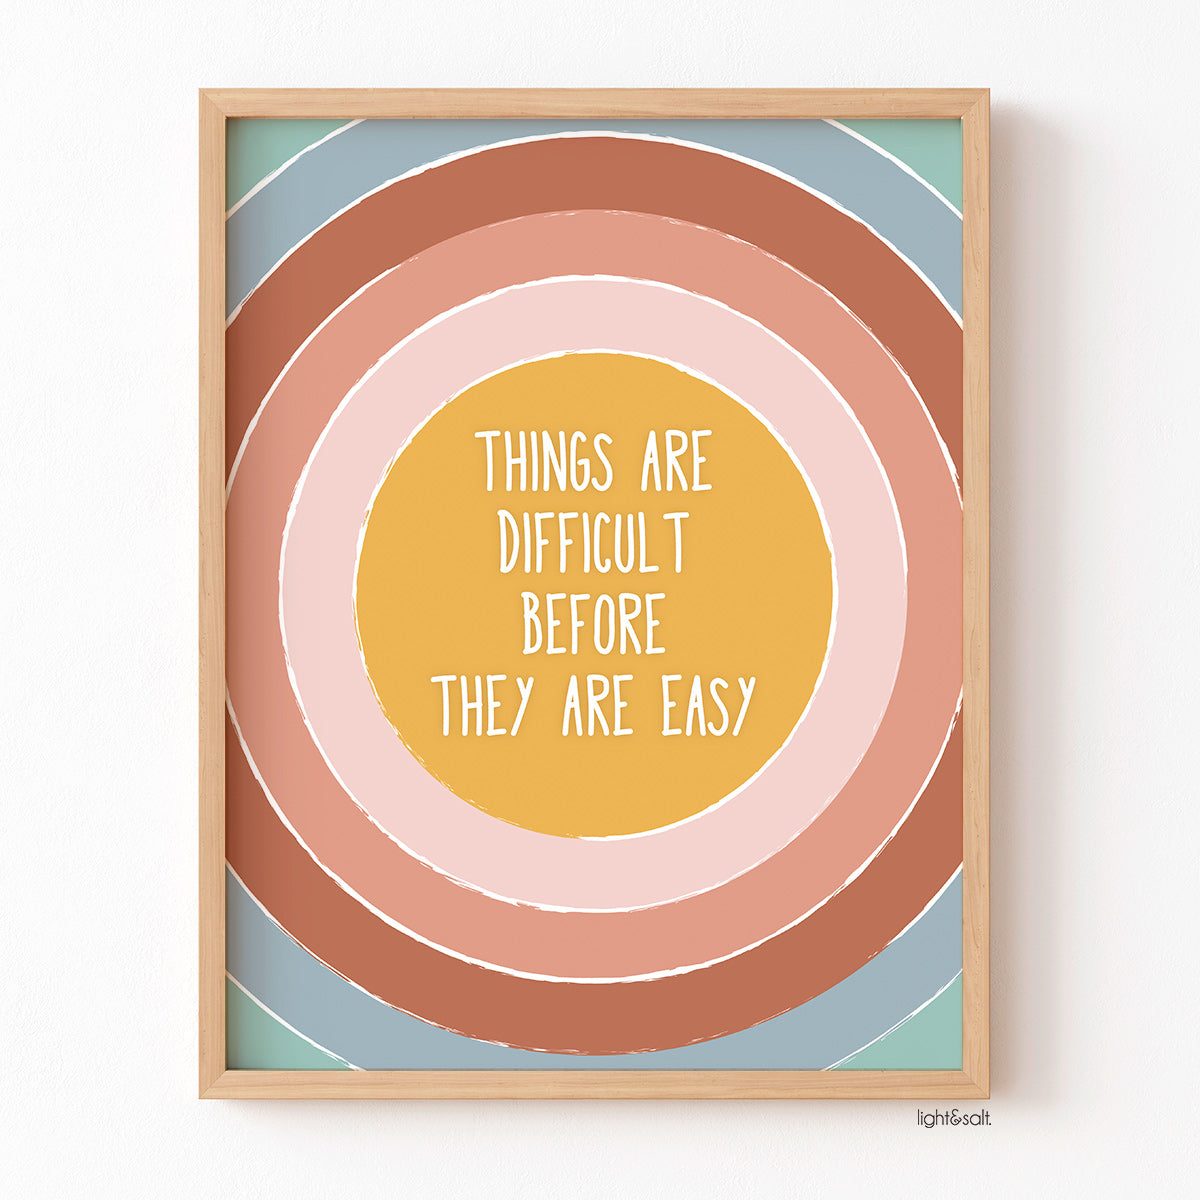 Things are difficult before they are easy poster, growth mindset